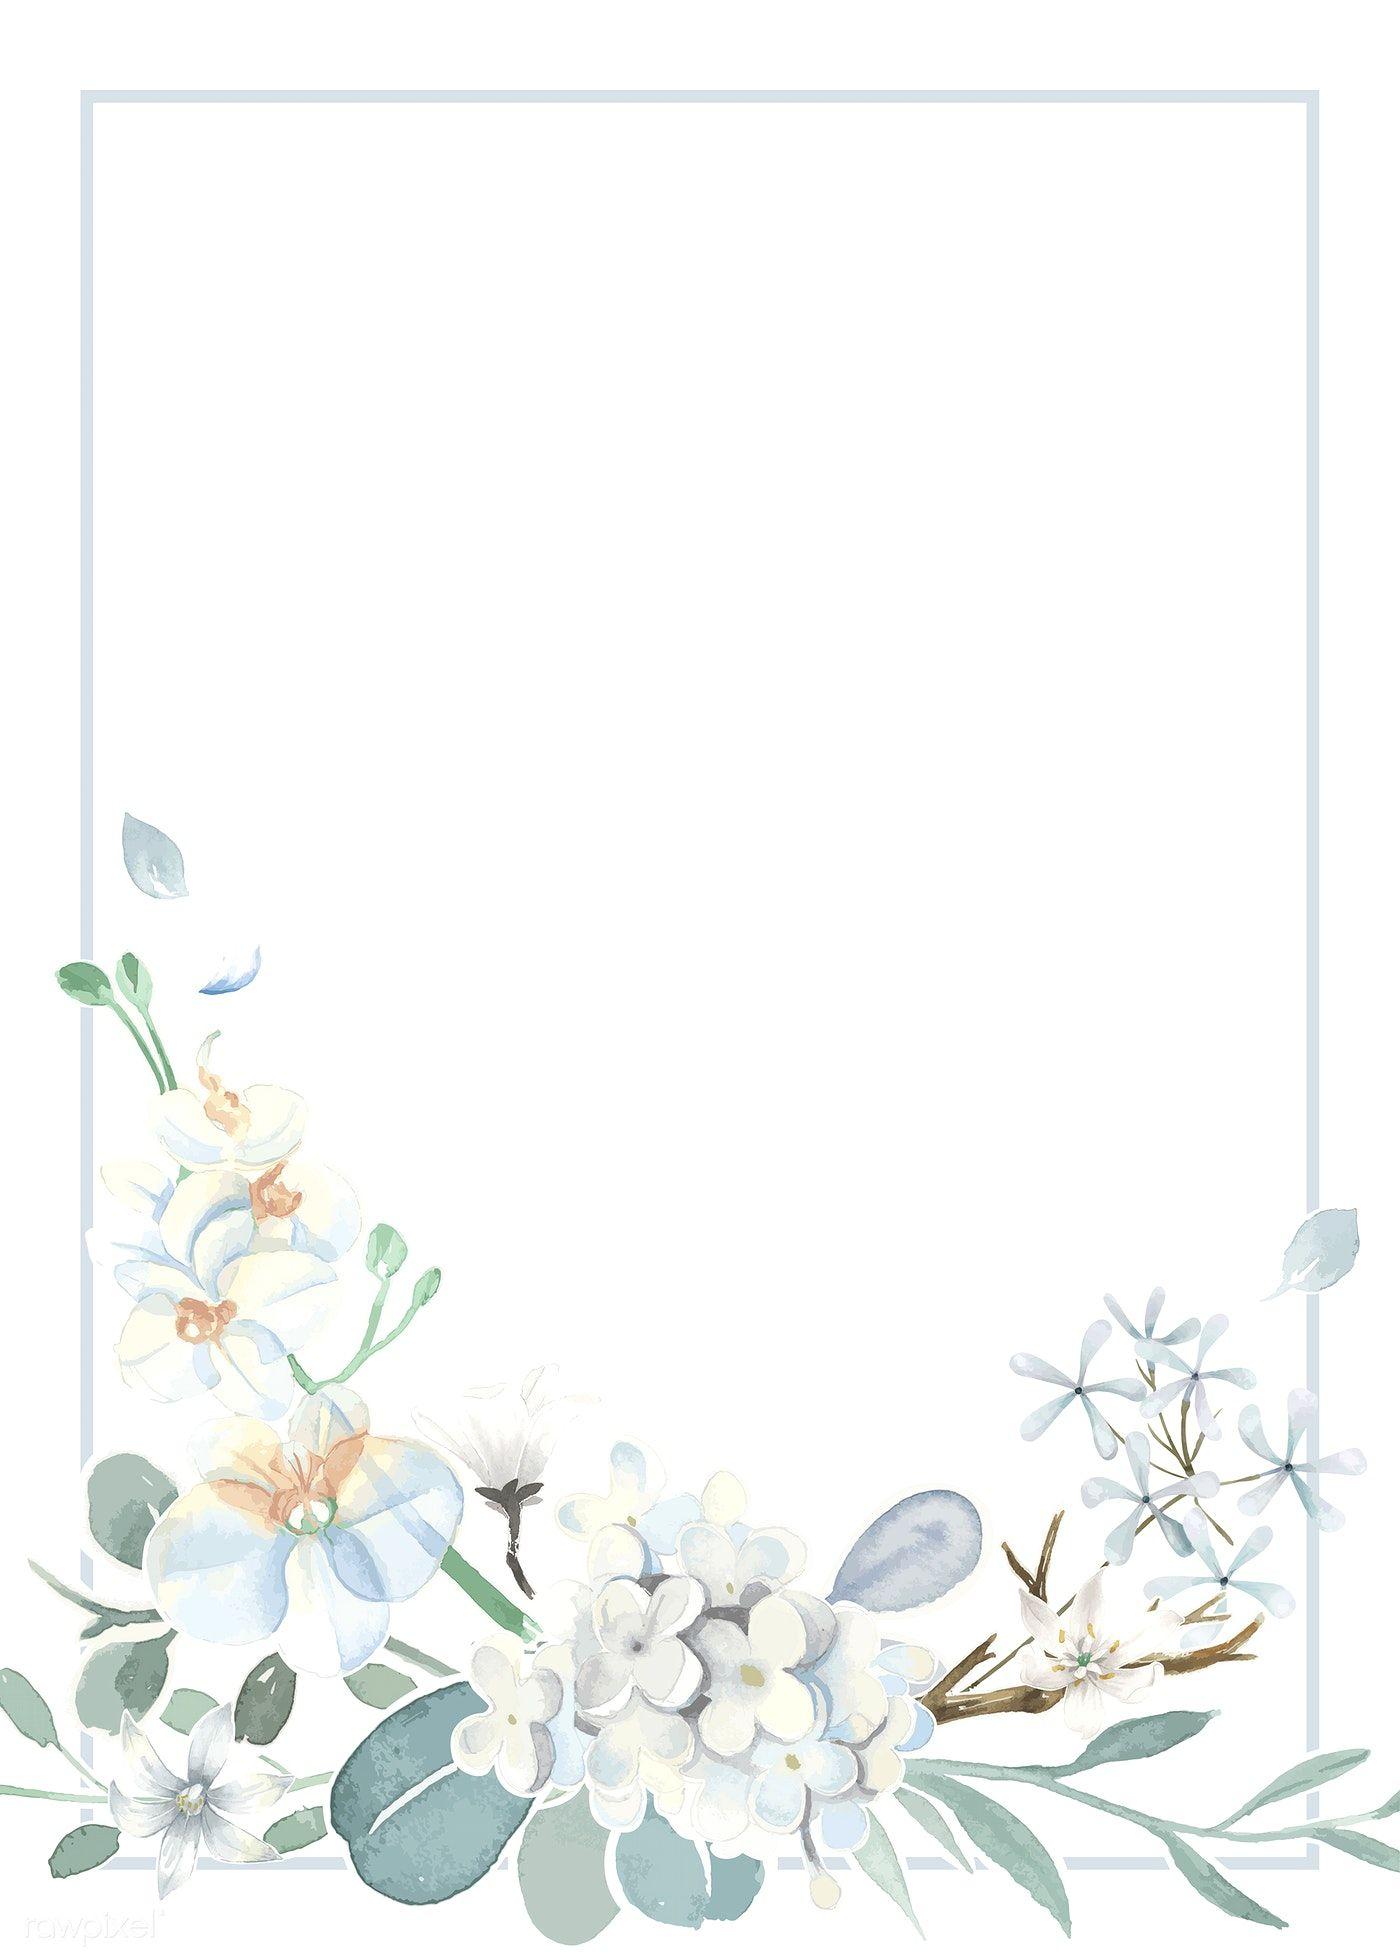 Download premium illustration of Invitation card with a light blue